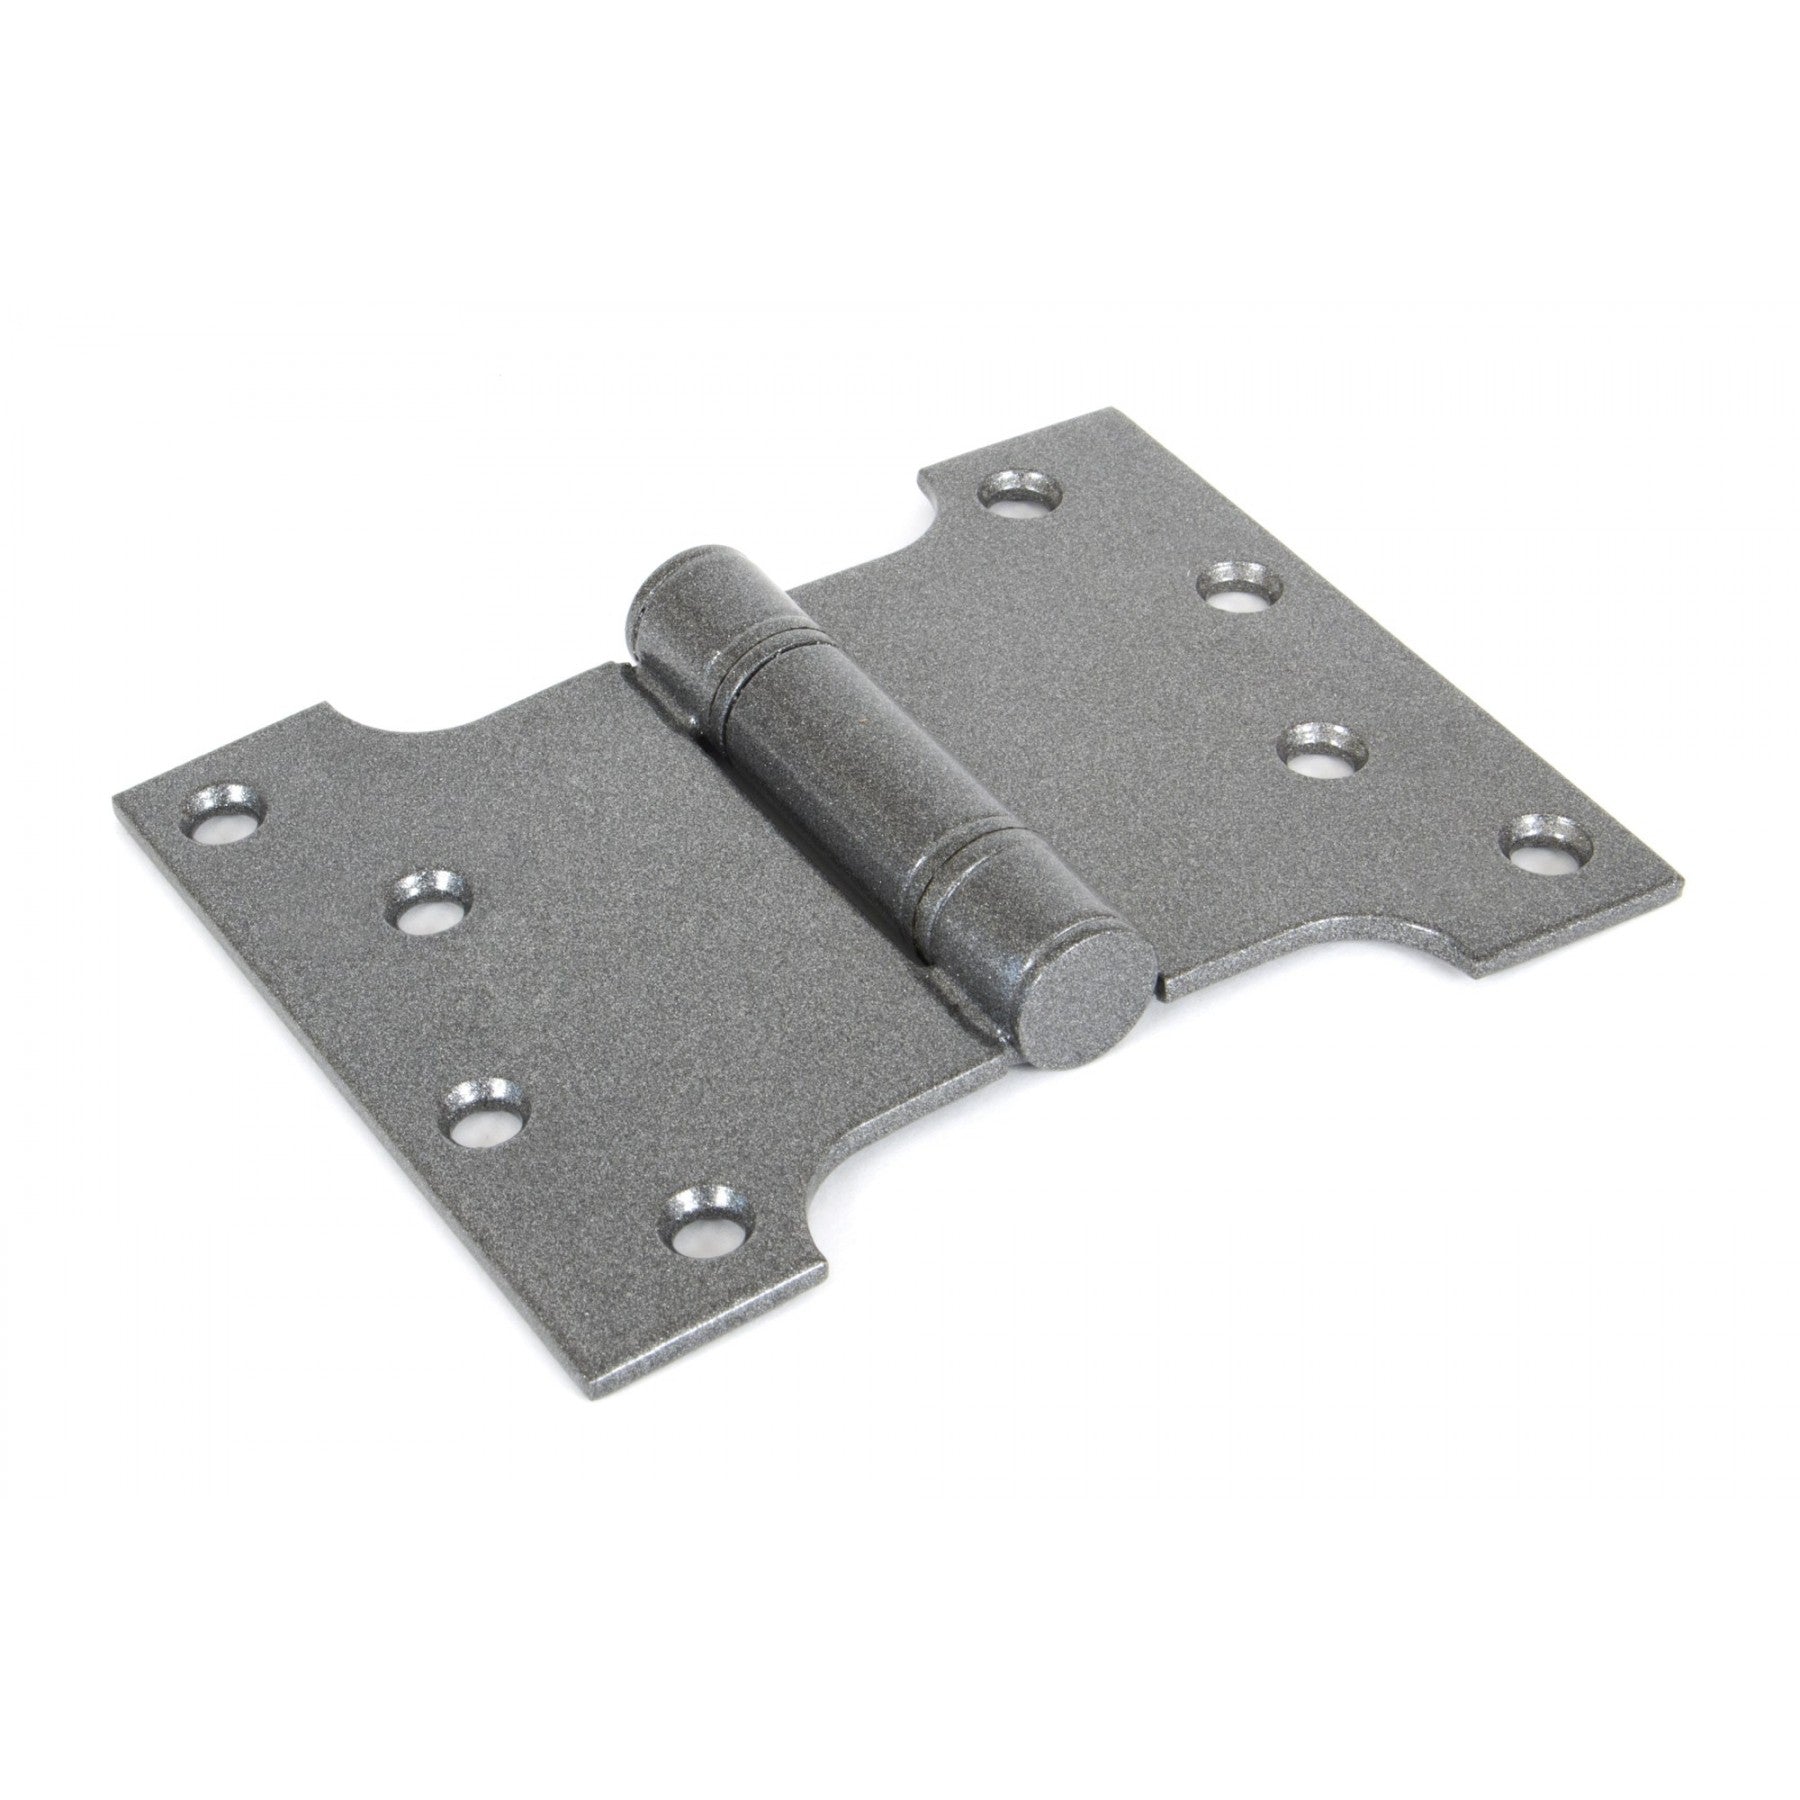 From the Anvil Pewter 4'' x 3" x 5" Ball Bearing Parliament Hinge (pair)